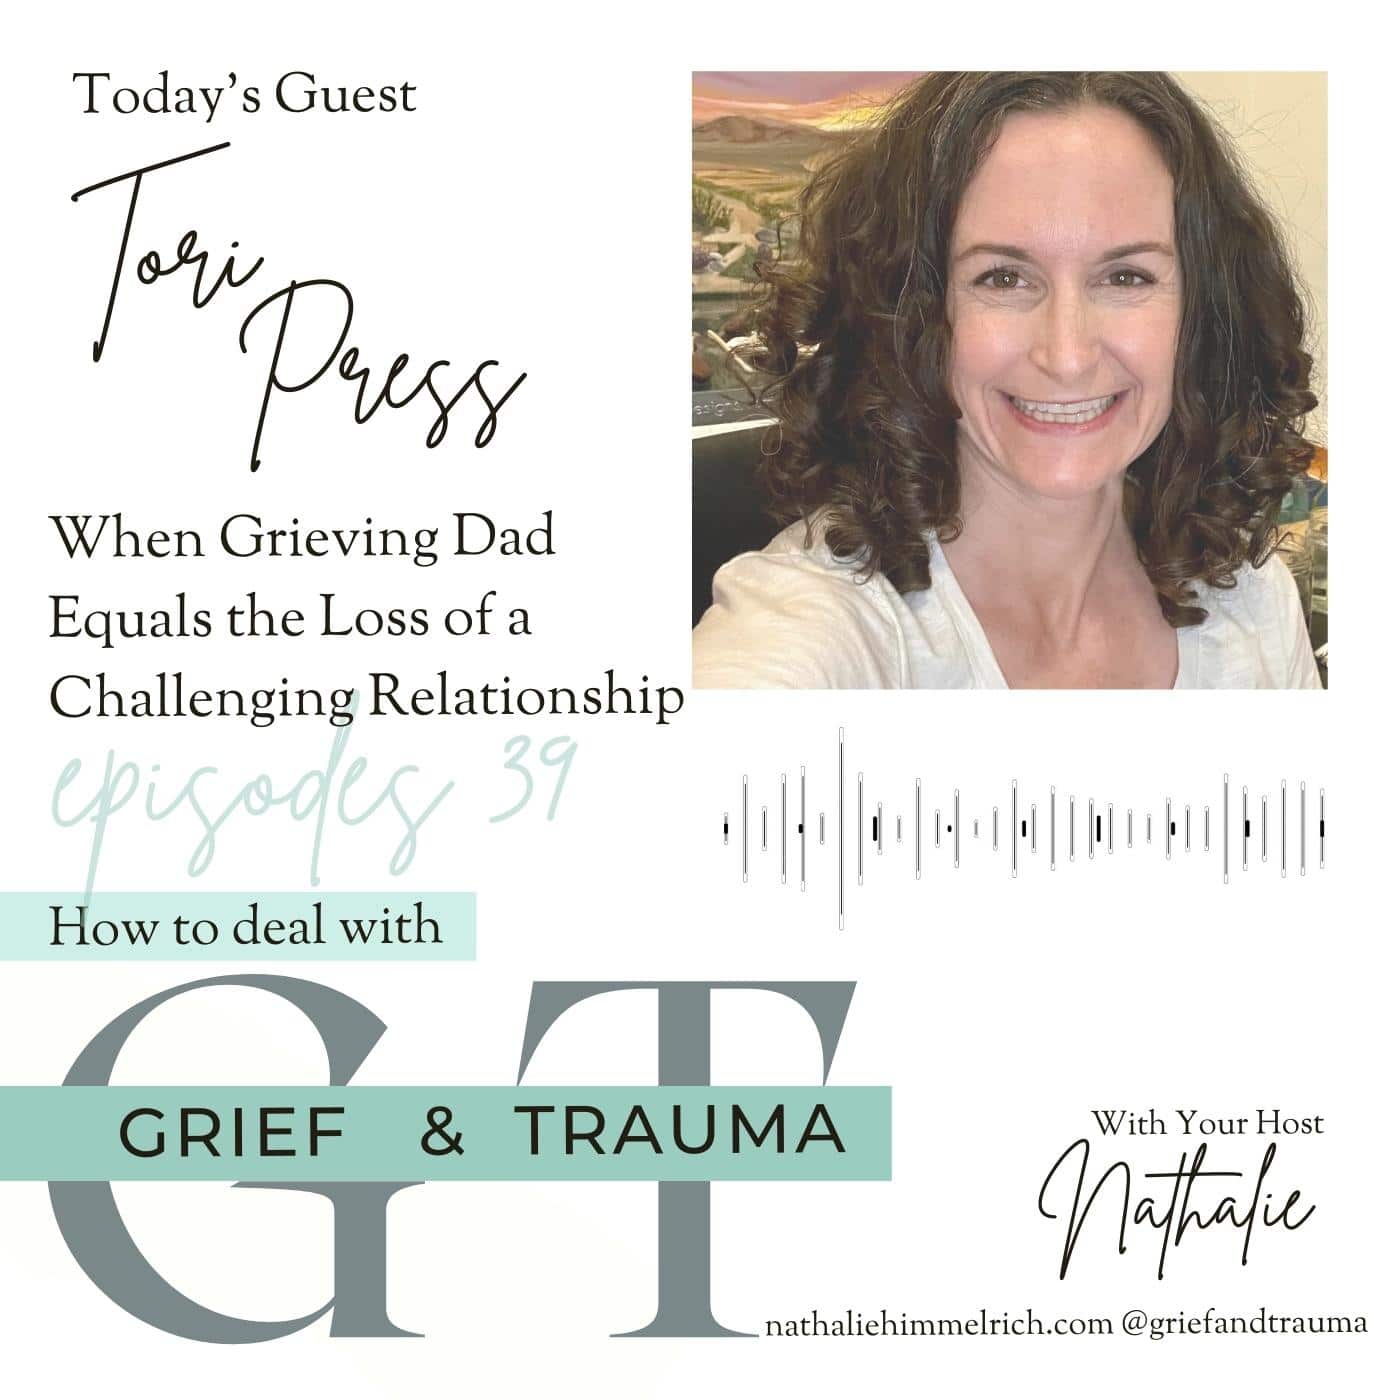 Tori Press on When Grieving Dad Equals the Loss of a Challenging Relationship | Episode 39